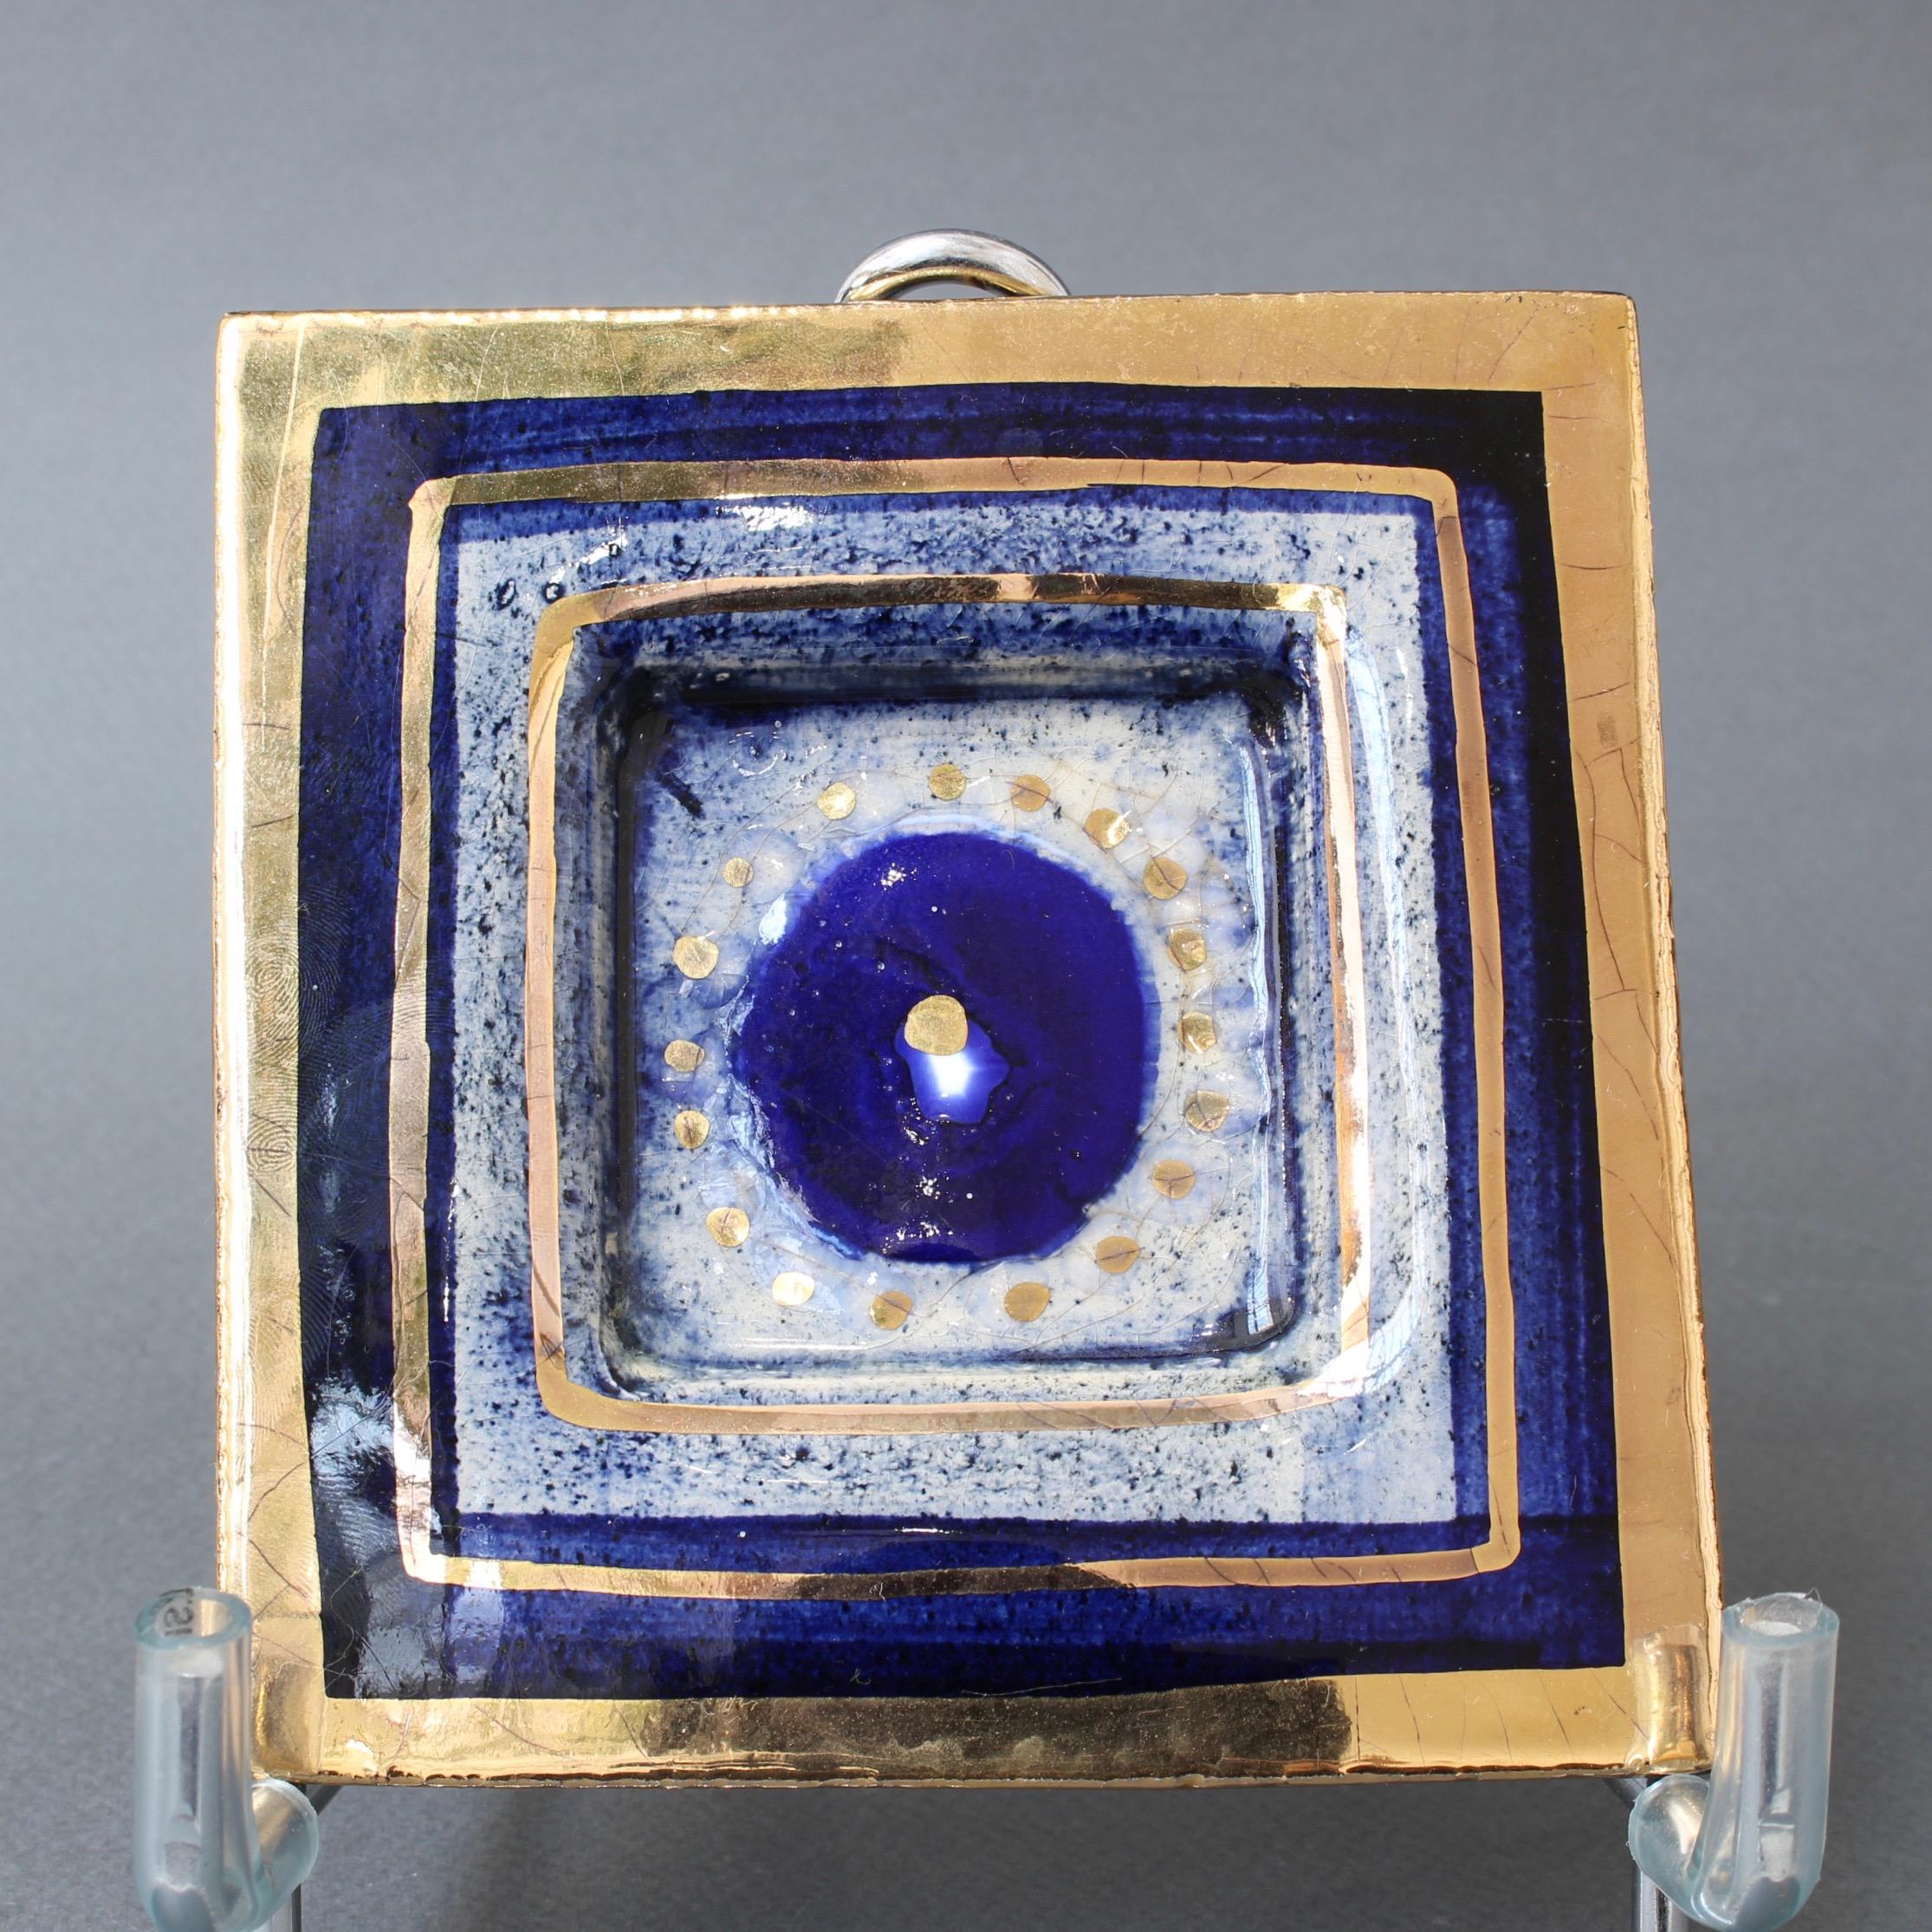 French decorative dish / vide-poche attributed to ceramicist Georges Pelletier (circa 1970s). Handmade, small ceramic with twilight blue trim and gold-lustre craquelure. The sunken base of the dish presents a large blue circle with gold 'iris'